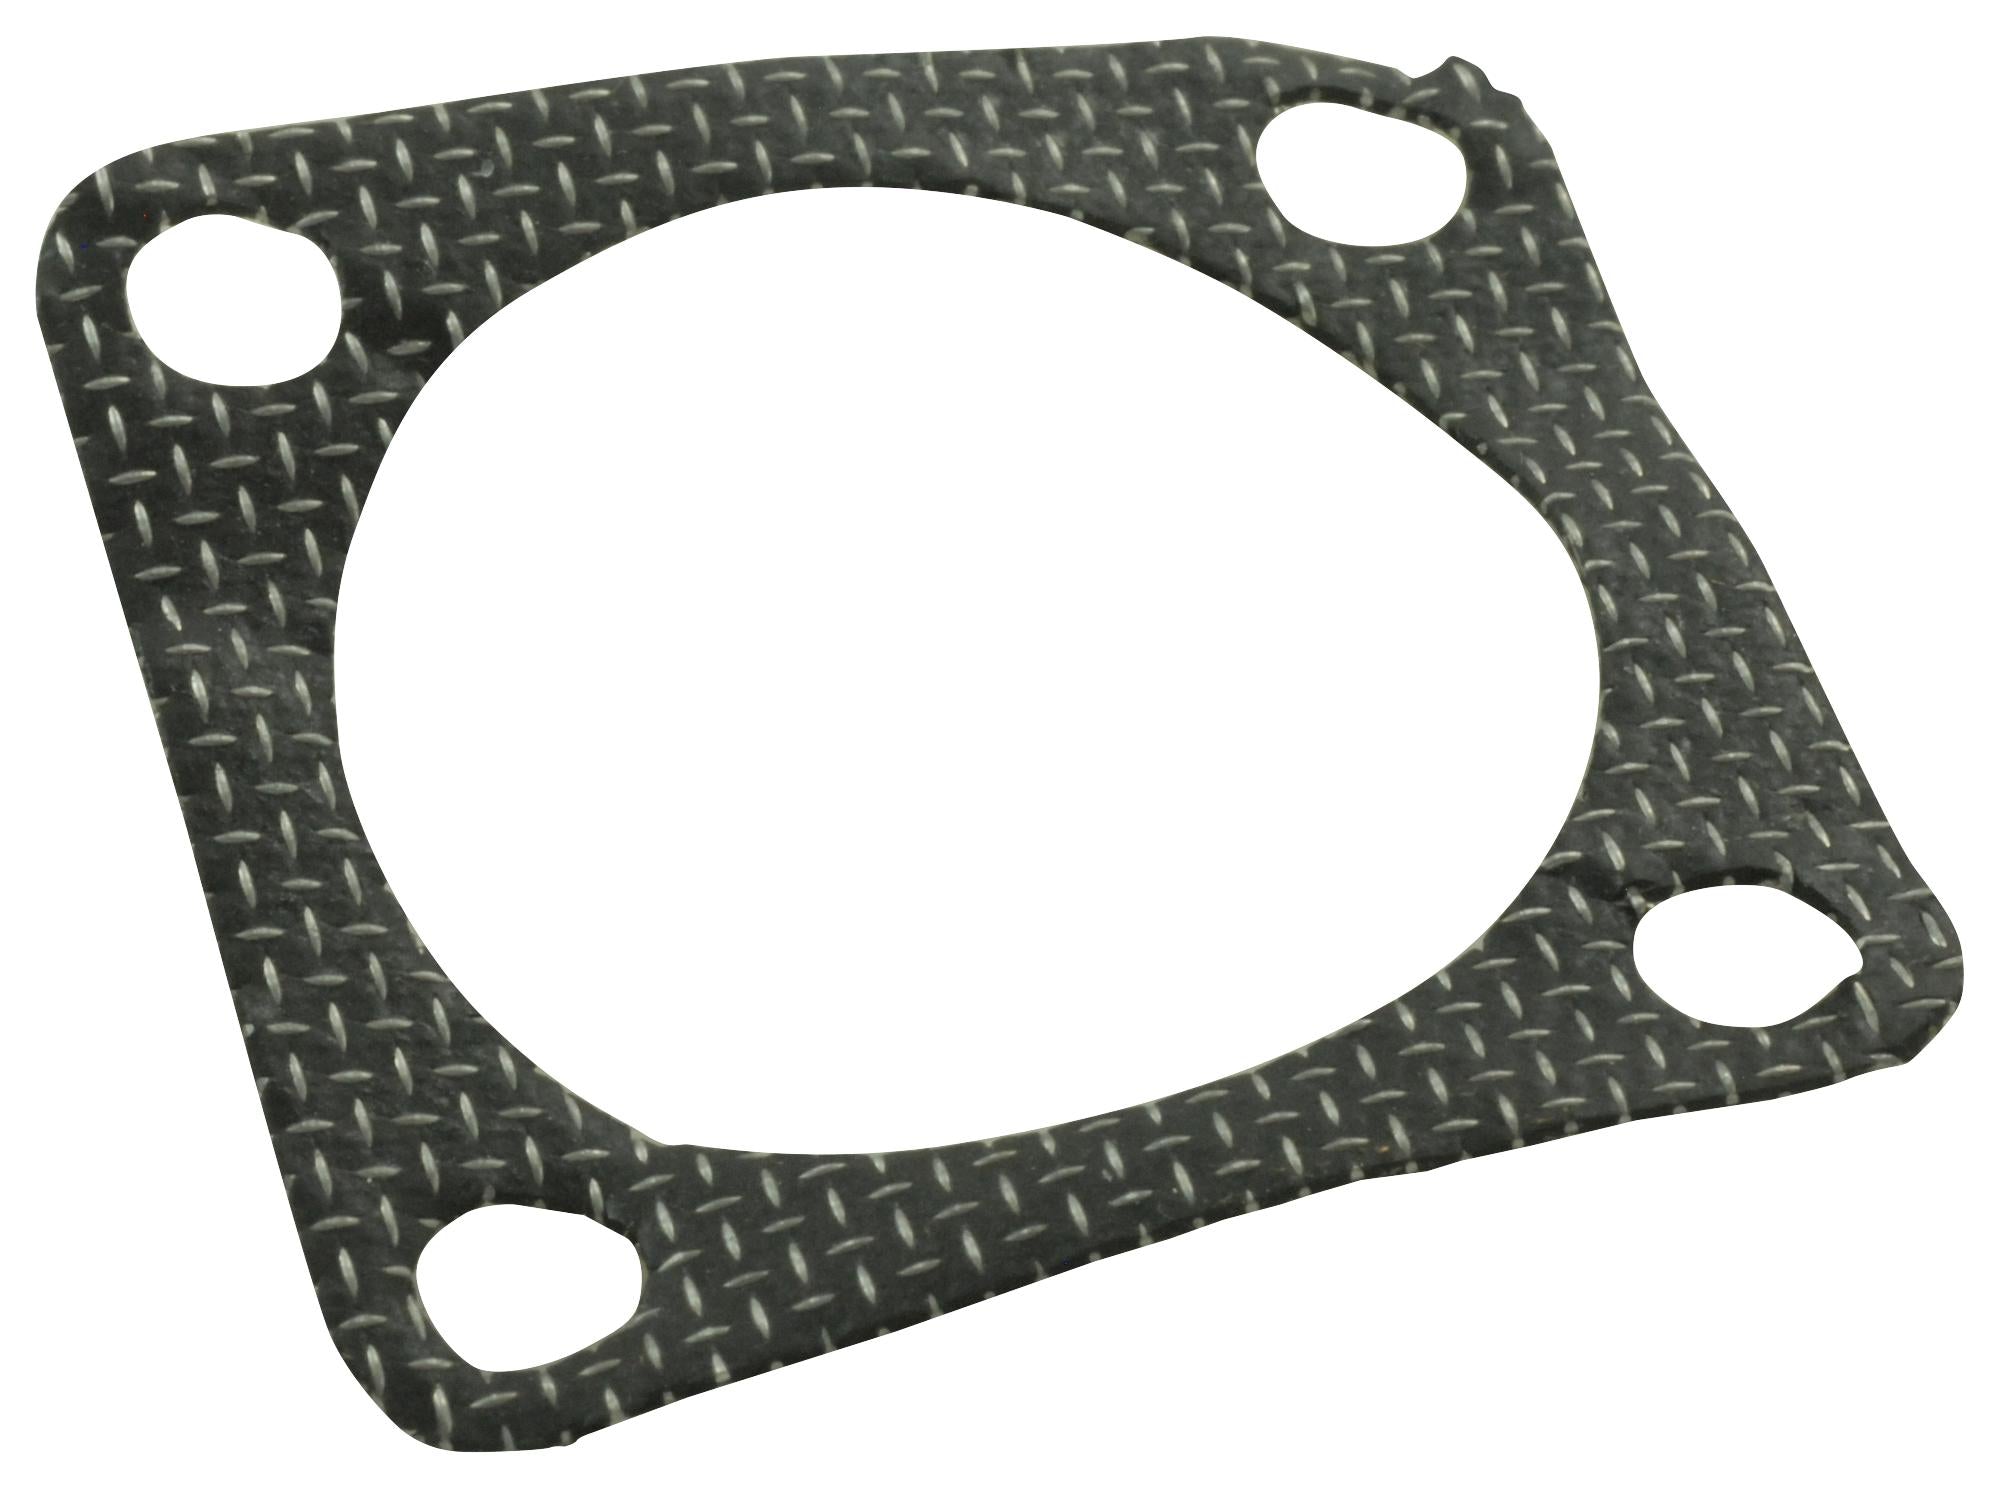 10-40450-16S SEALING GASKET, SIZE 16S, RUBBER AMPHENOL INDUSTRIAL